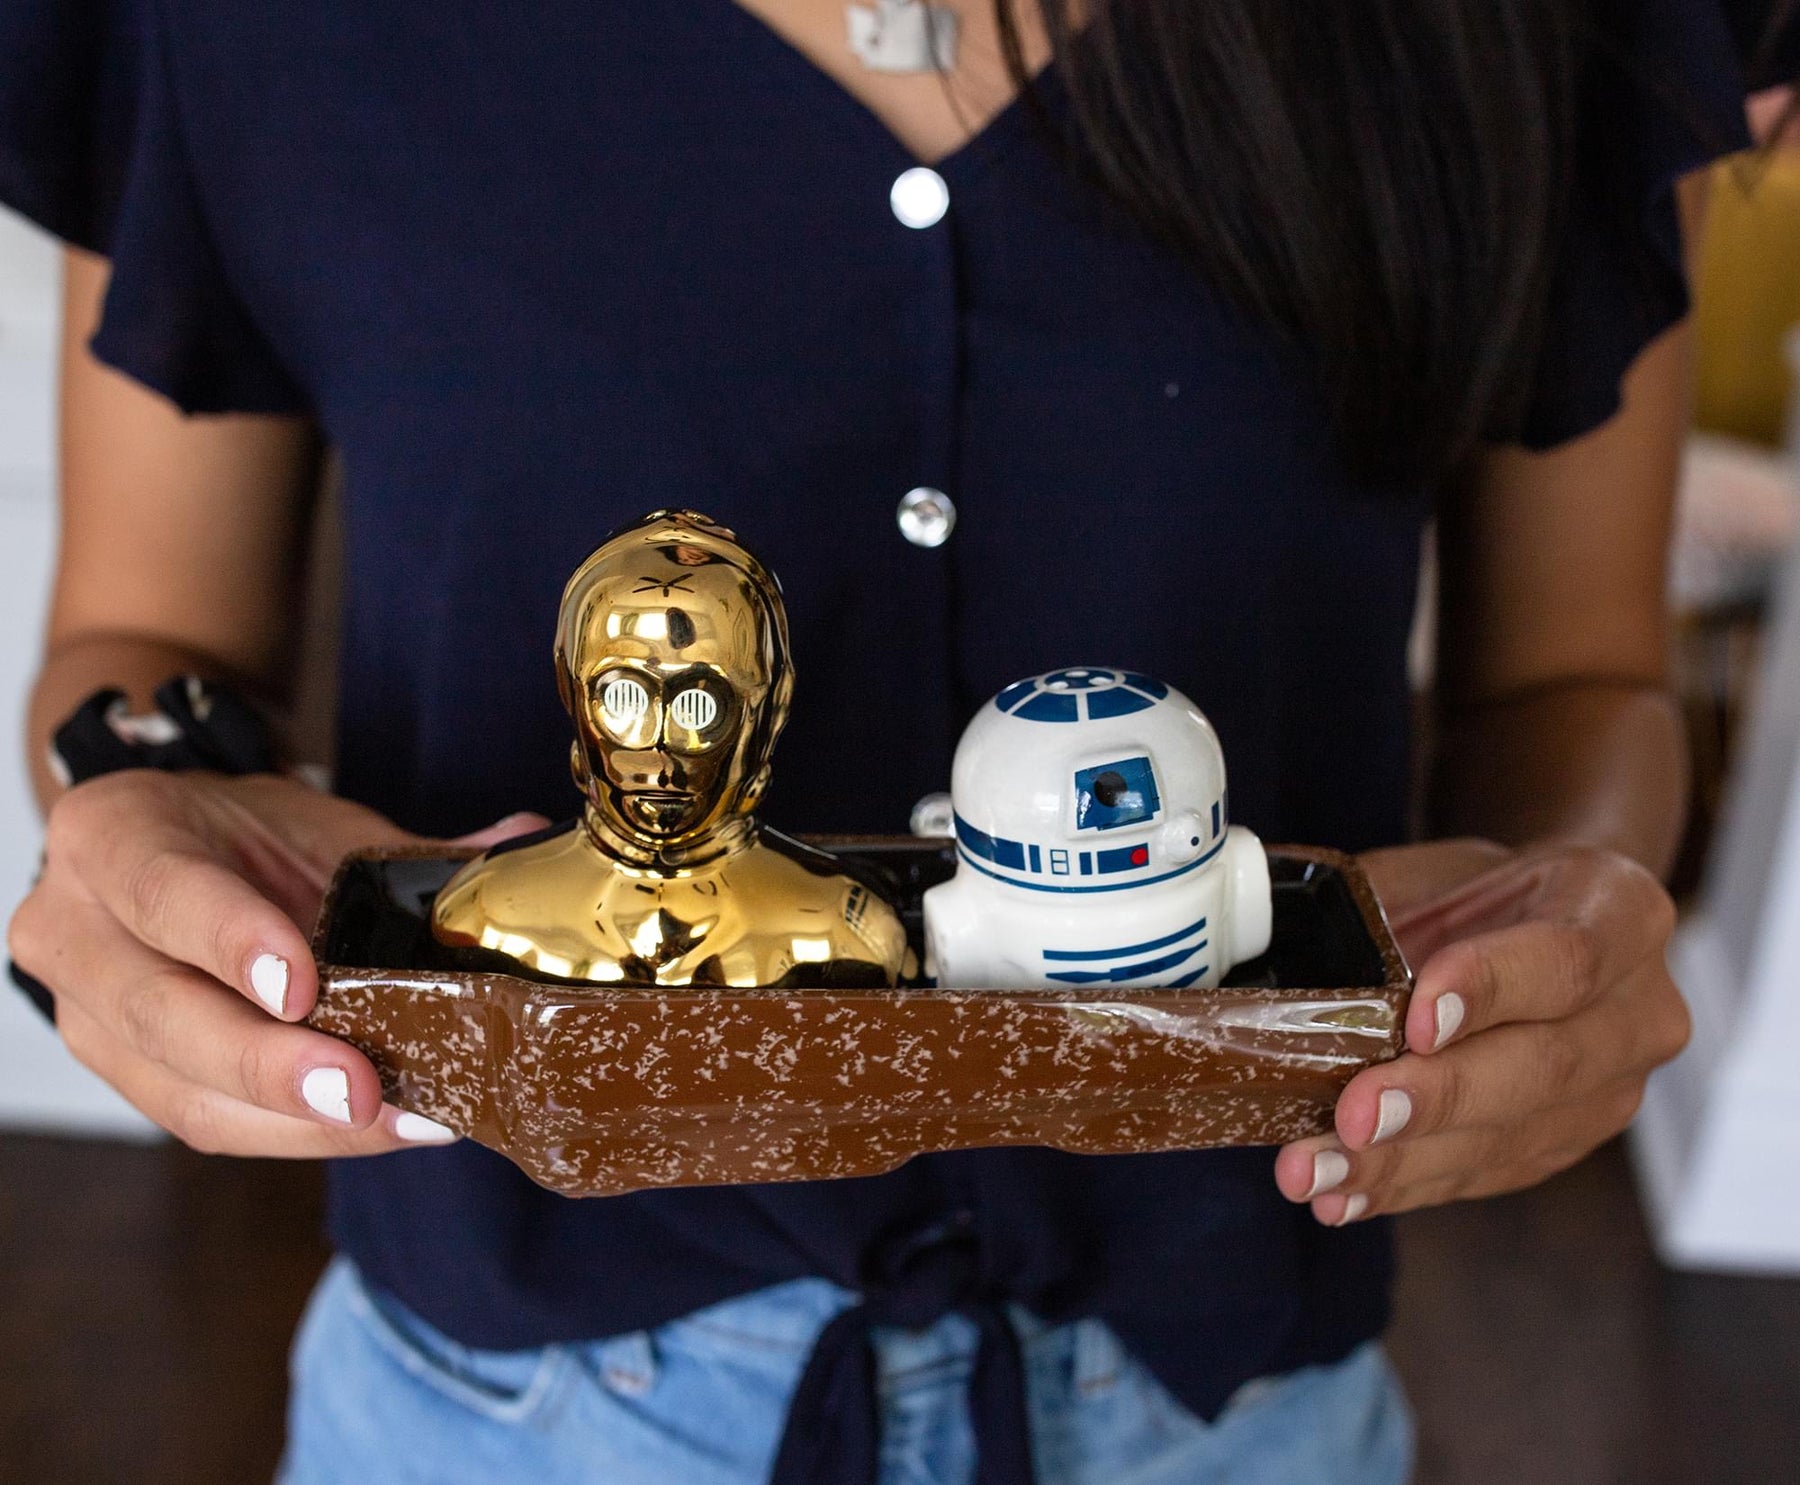 Star Wars C-3PO and R2-D2 Ceramic Shaker Set with Sandcrawler Display Tray